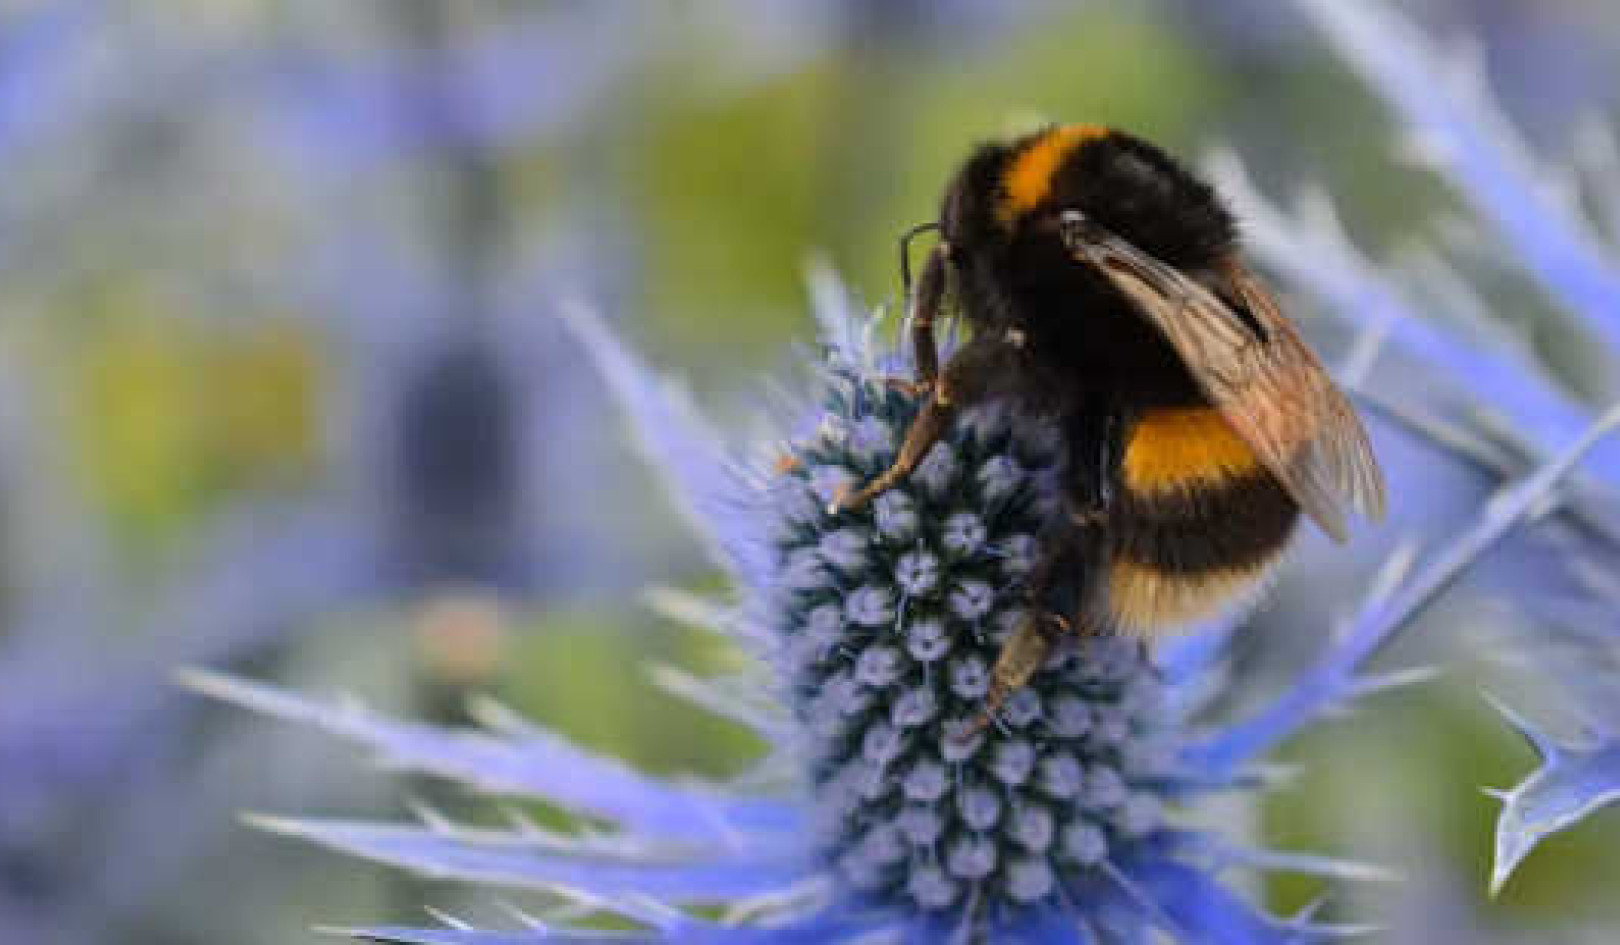 Plants Are Flowering A Month Earlier – Here’s What It Could Mean For Pollinating Insects